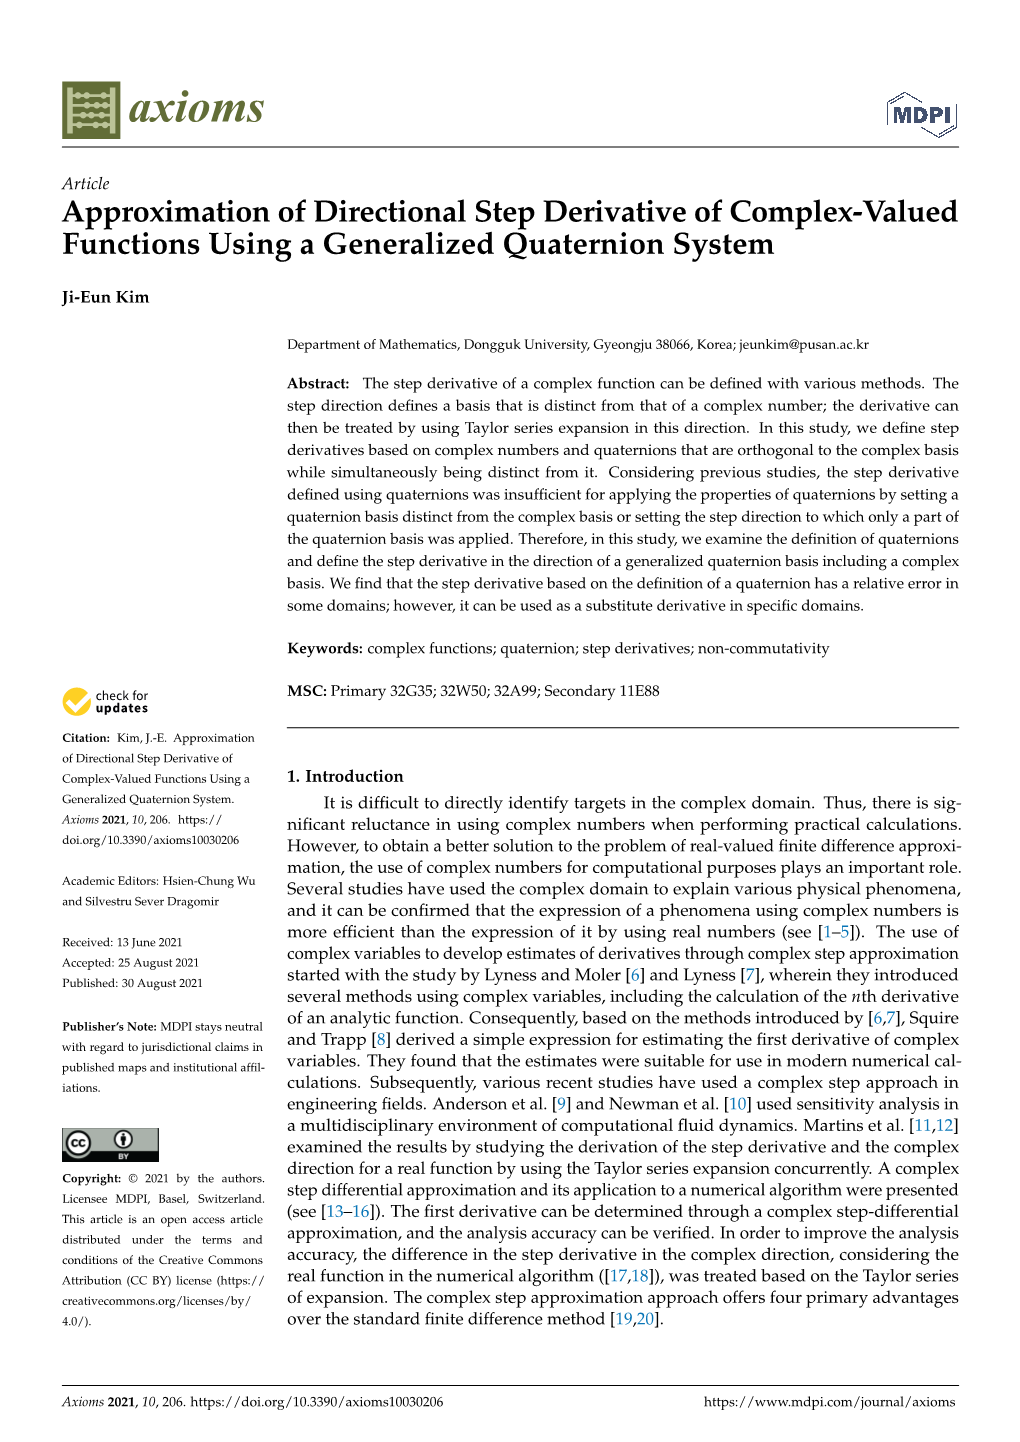 Approximation of Directional Step Derivative of Complex-Valued Functions Using a Generalized Quaternion System